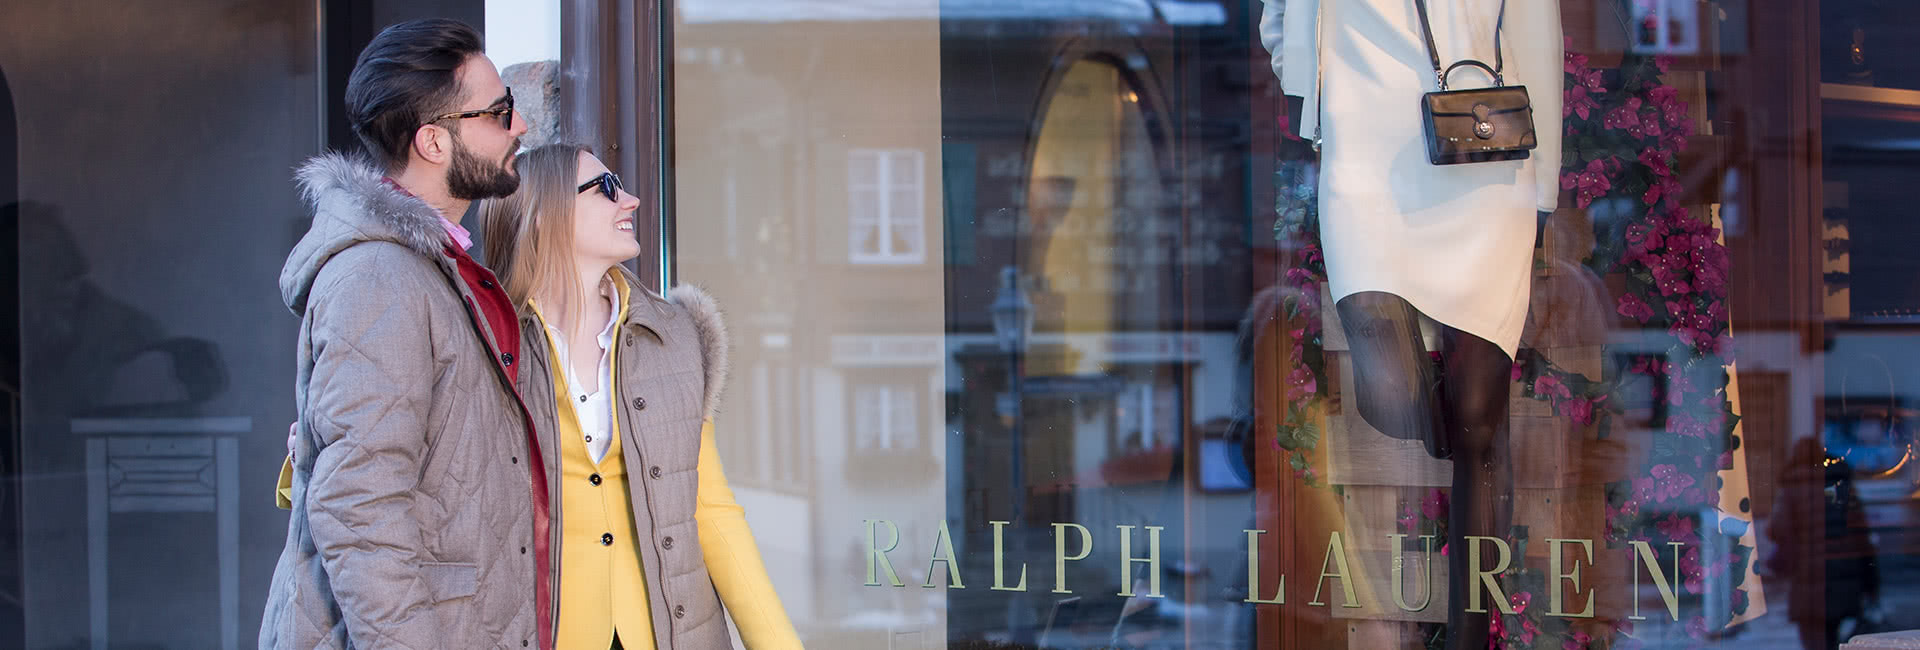 Ralph Lauren Opens Two New Boutiques in Gstaad